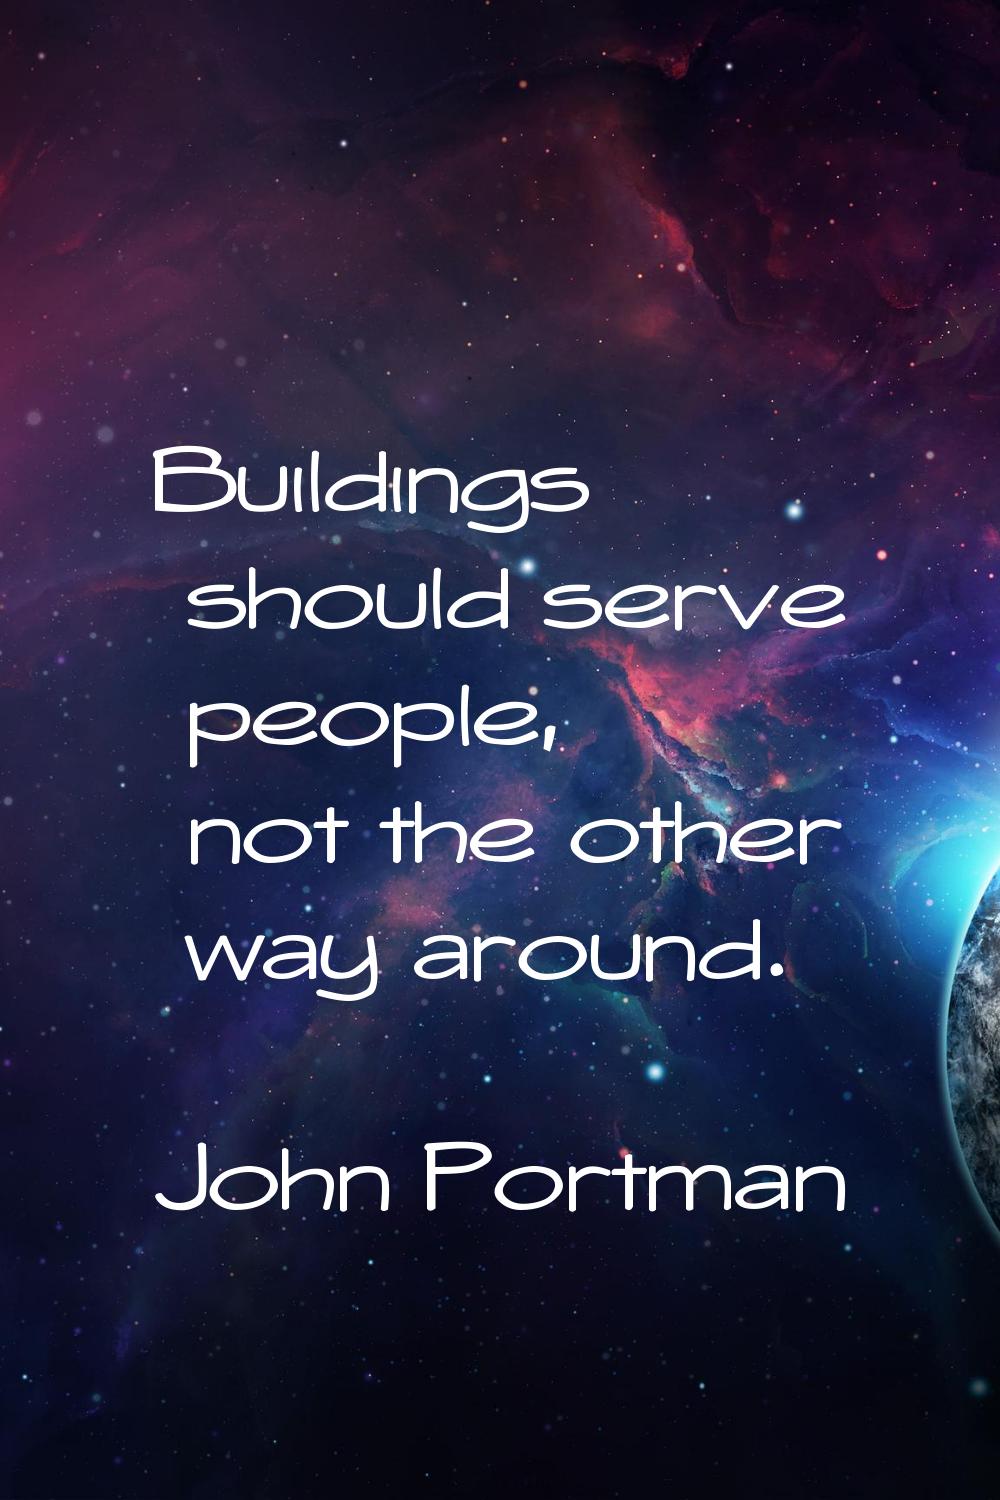 Buildings should serve people, not the other way around.